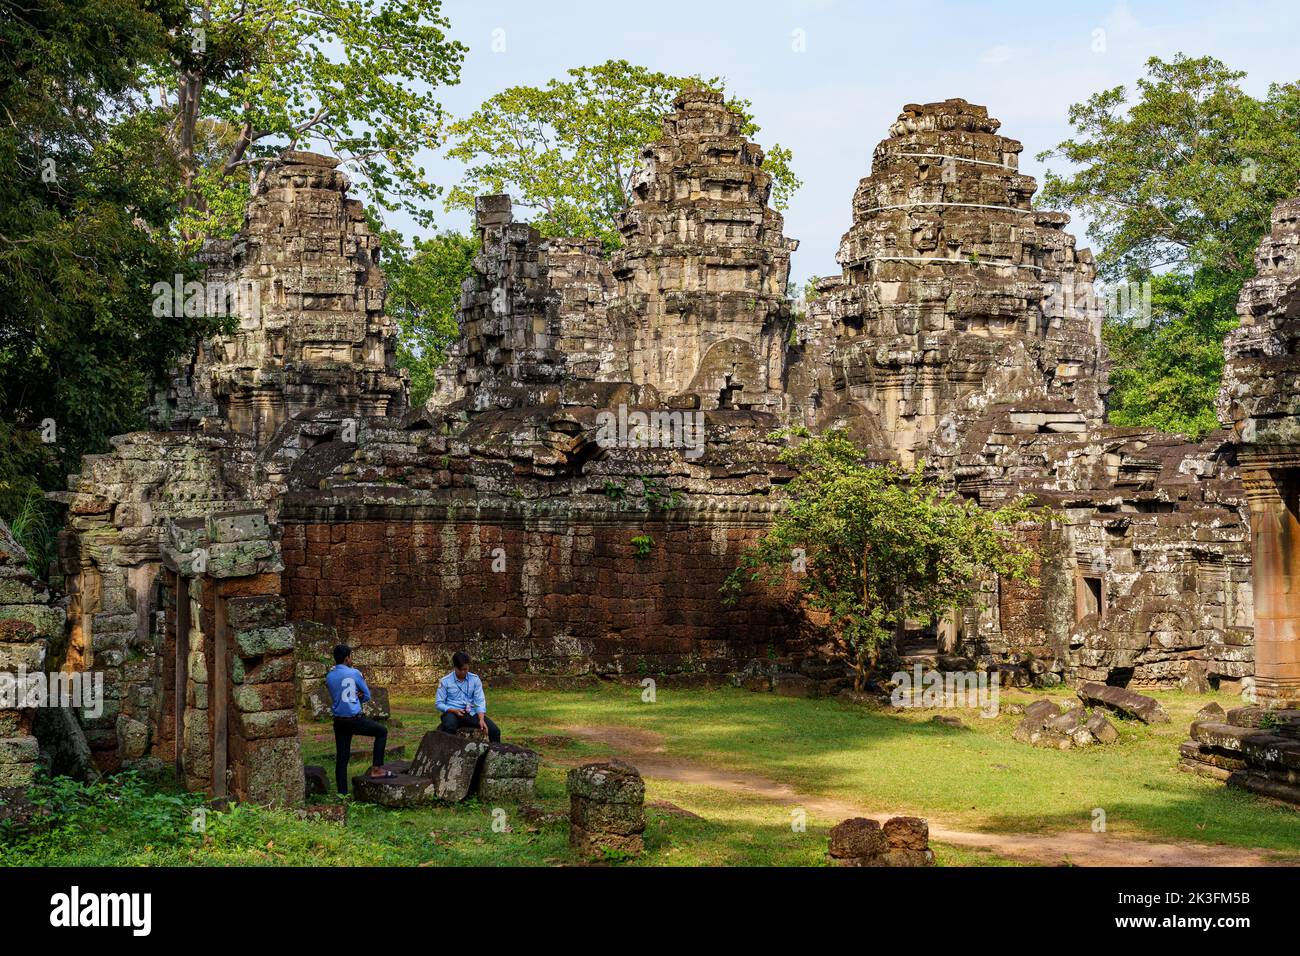 Cambodia. Siem Reap Province. The archaeological park of Angkor. The old ruins of Banteay Kdei Temple Stock Photo